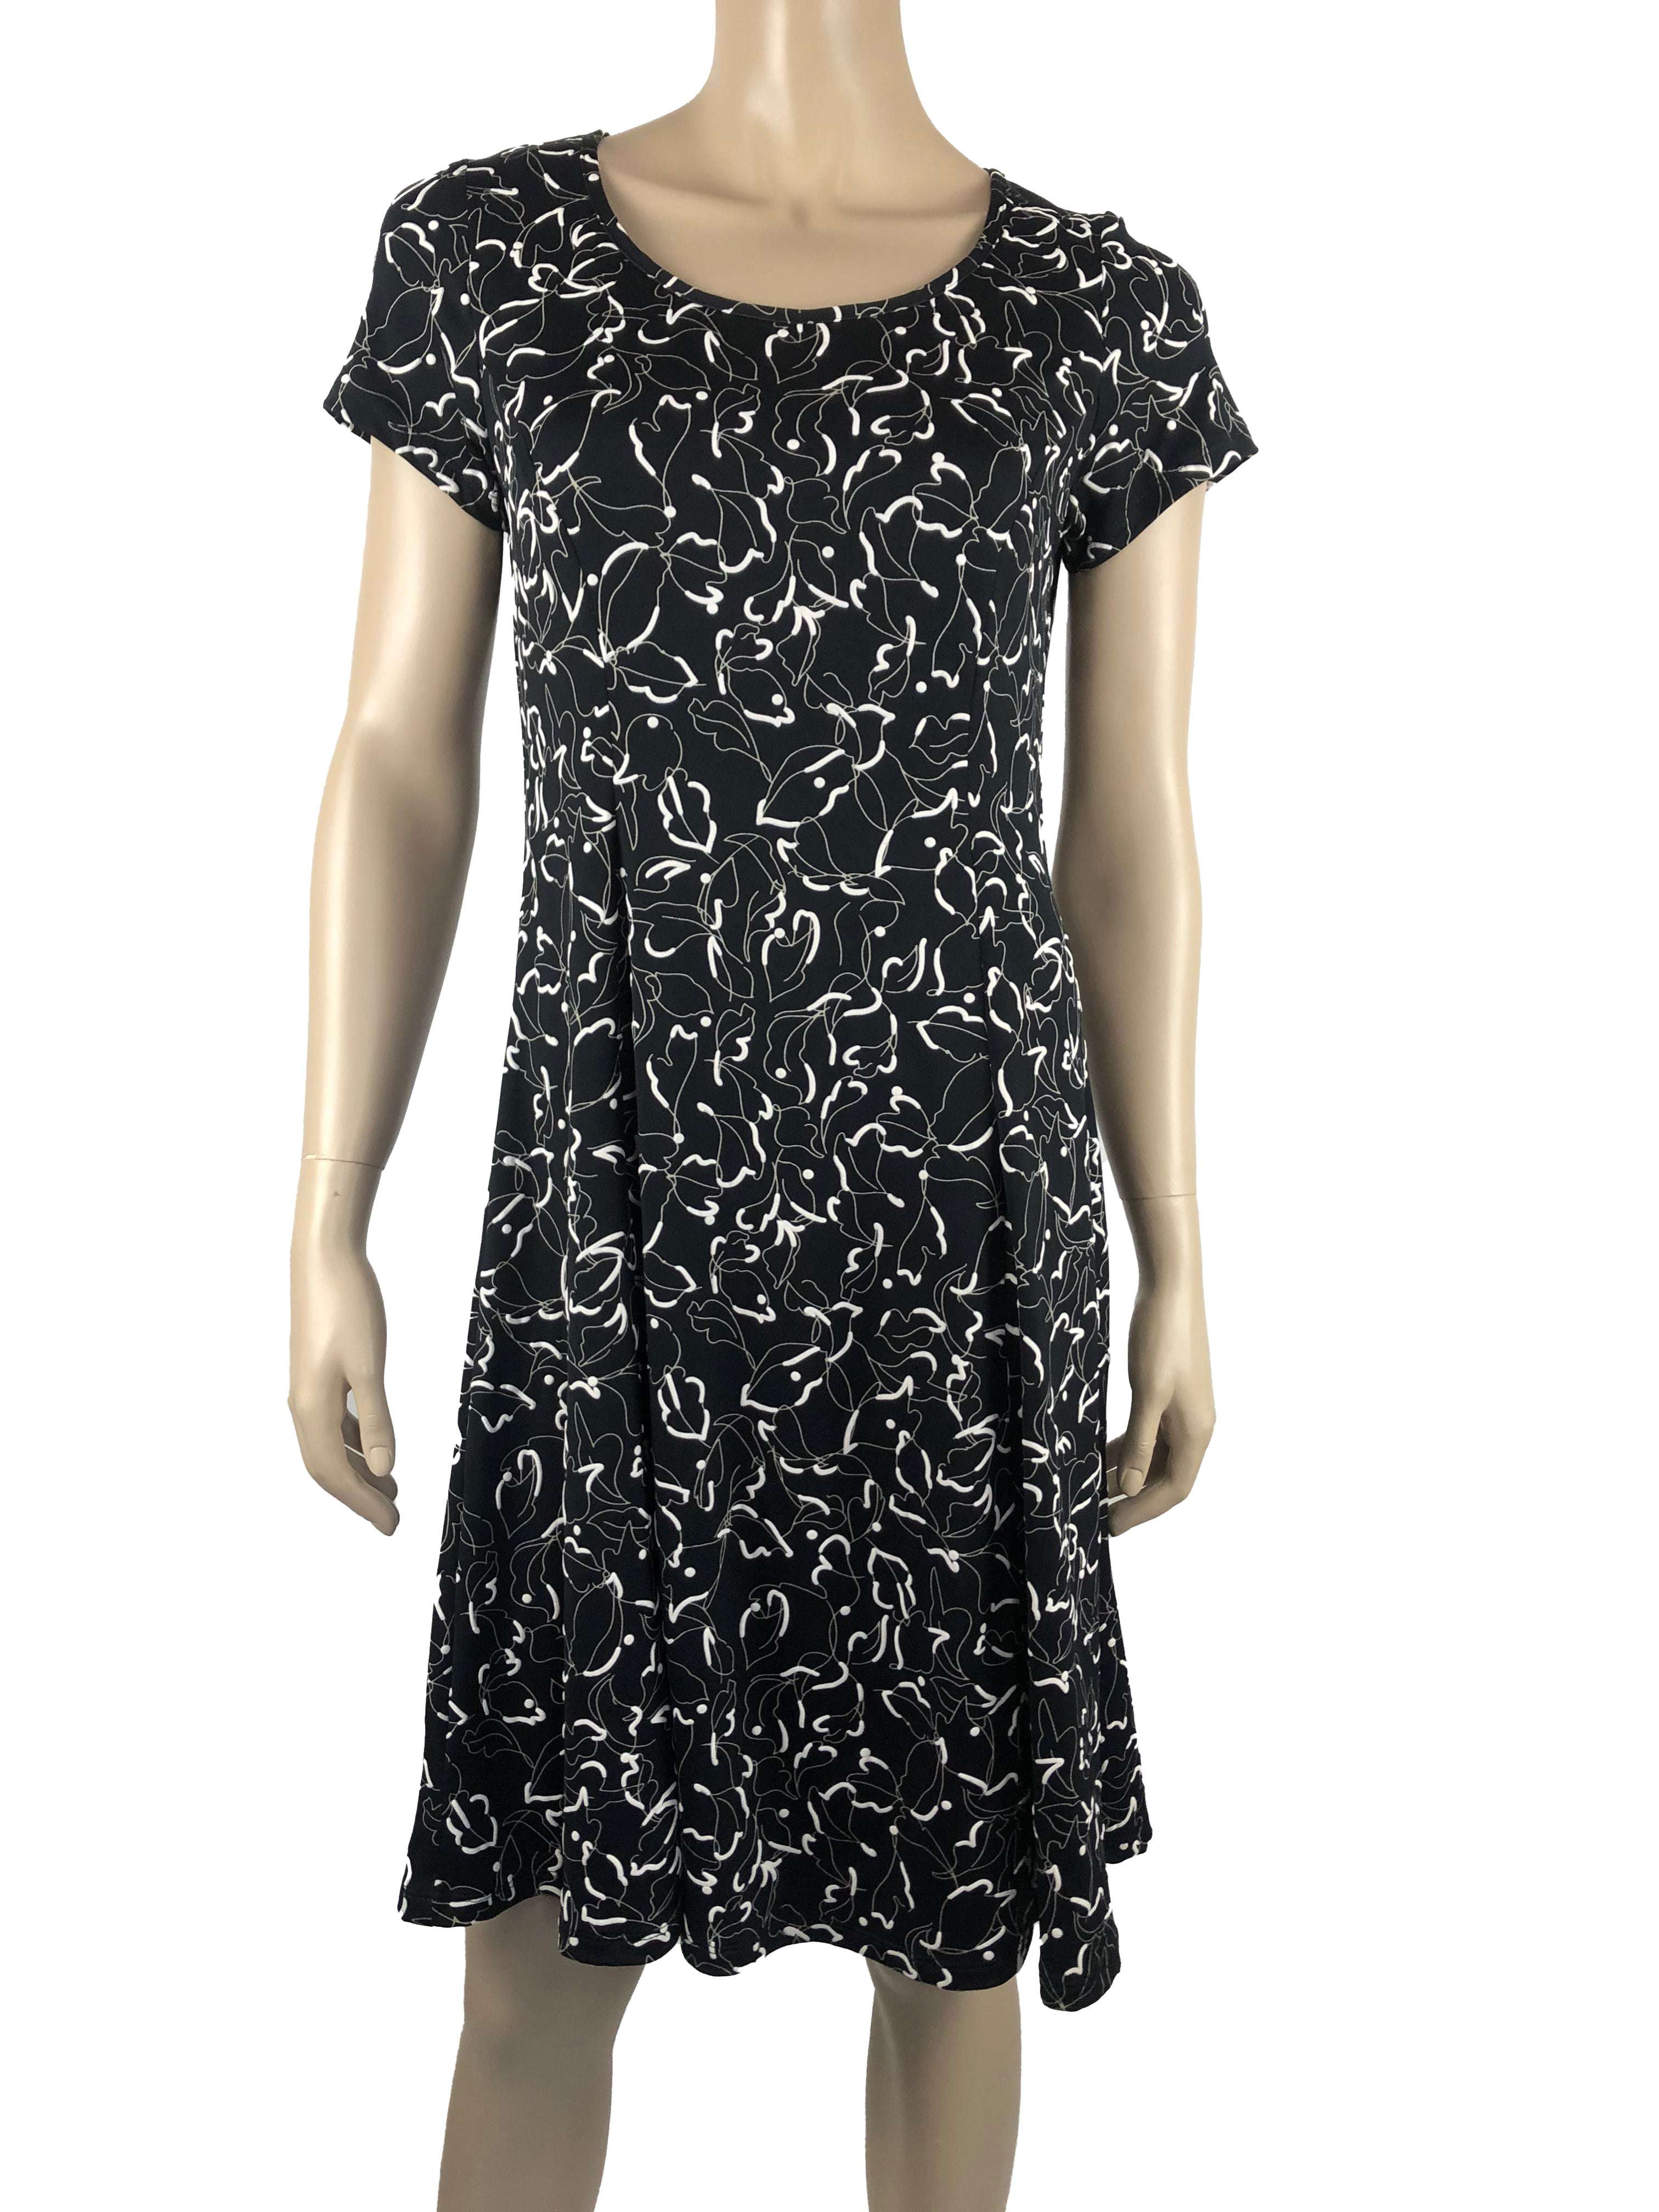 Women's Dresses On Sale Black and White Flattering Design Quality Stretch Fabric Made in Canada - Yvonne Marie - Yvonne Marie